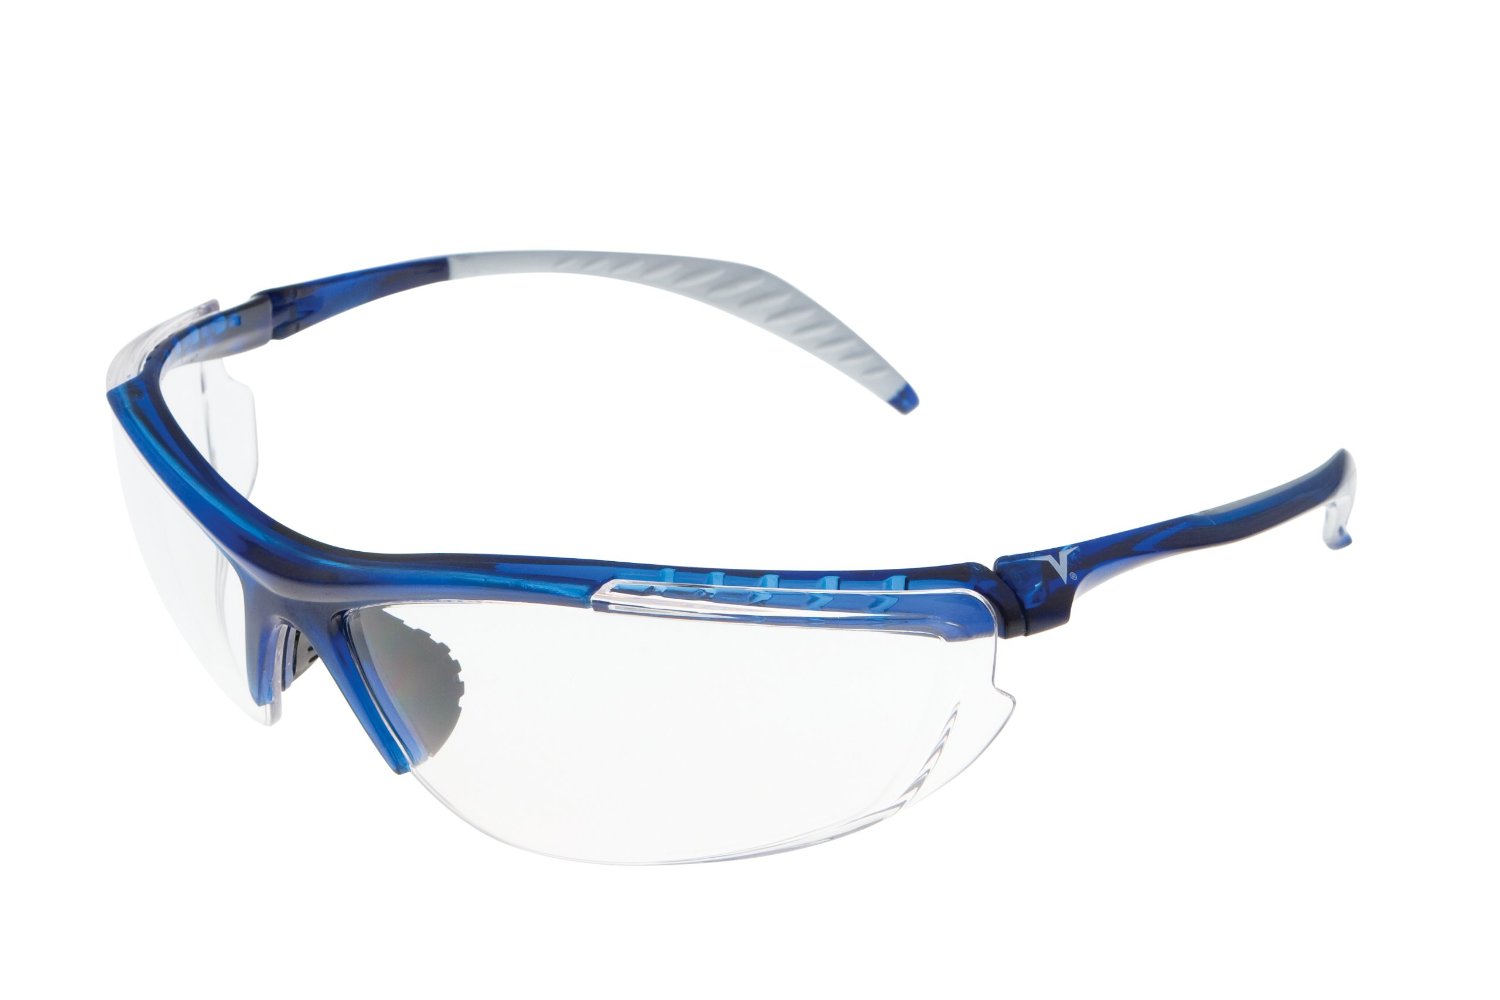 Encon Wraparound Veratti Clear Lens Safety Glasses with a Translucent Blue Frame